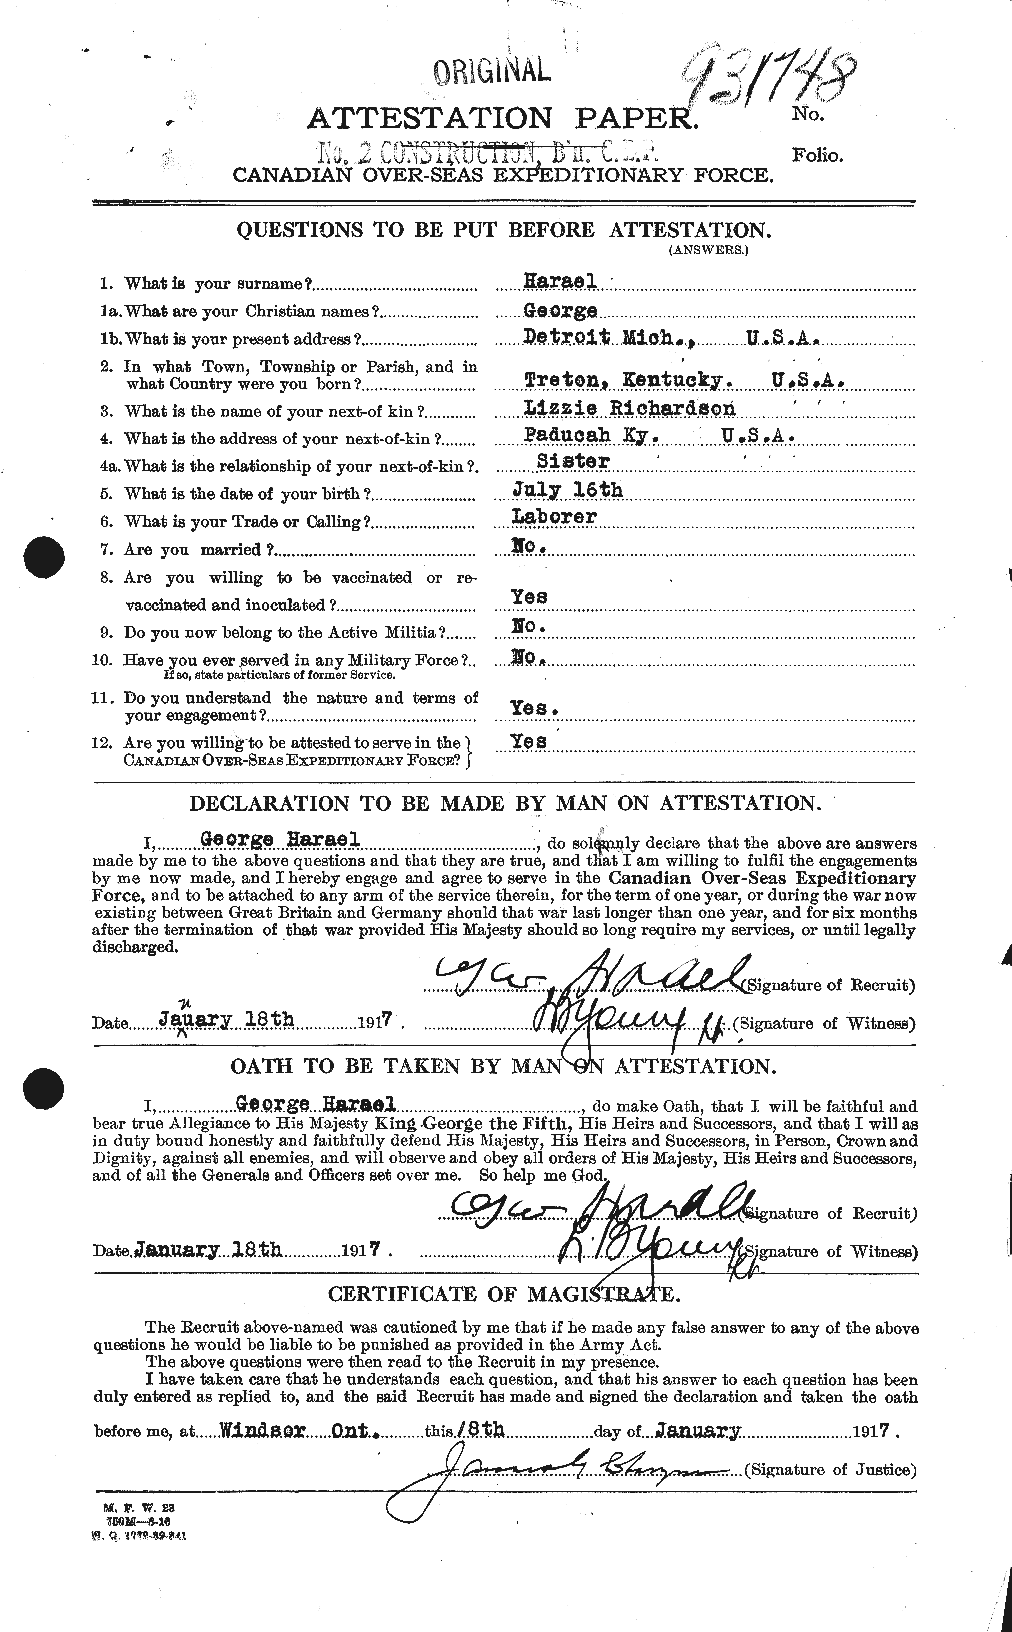 Personnel Records of the First World War - CEF 376106a